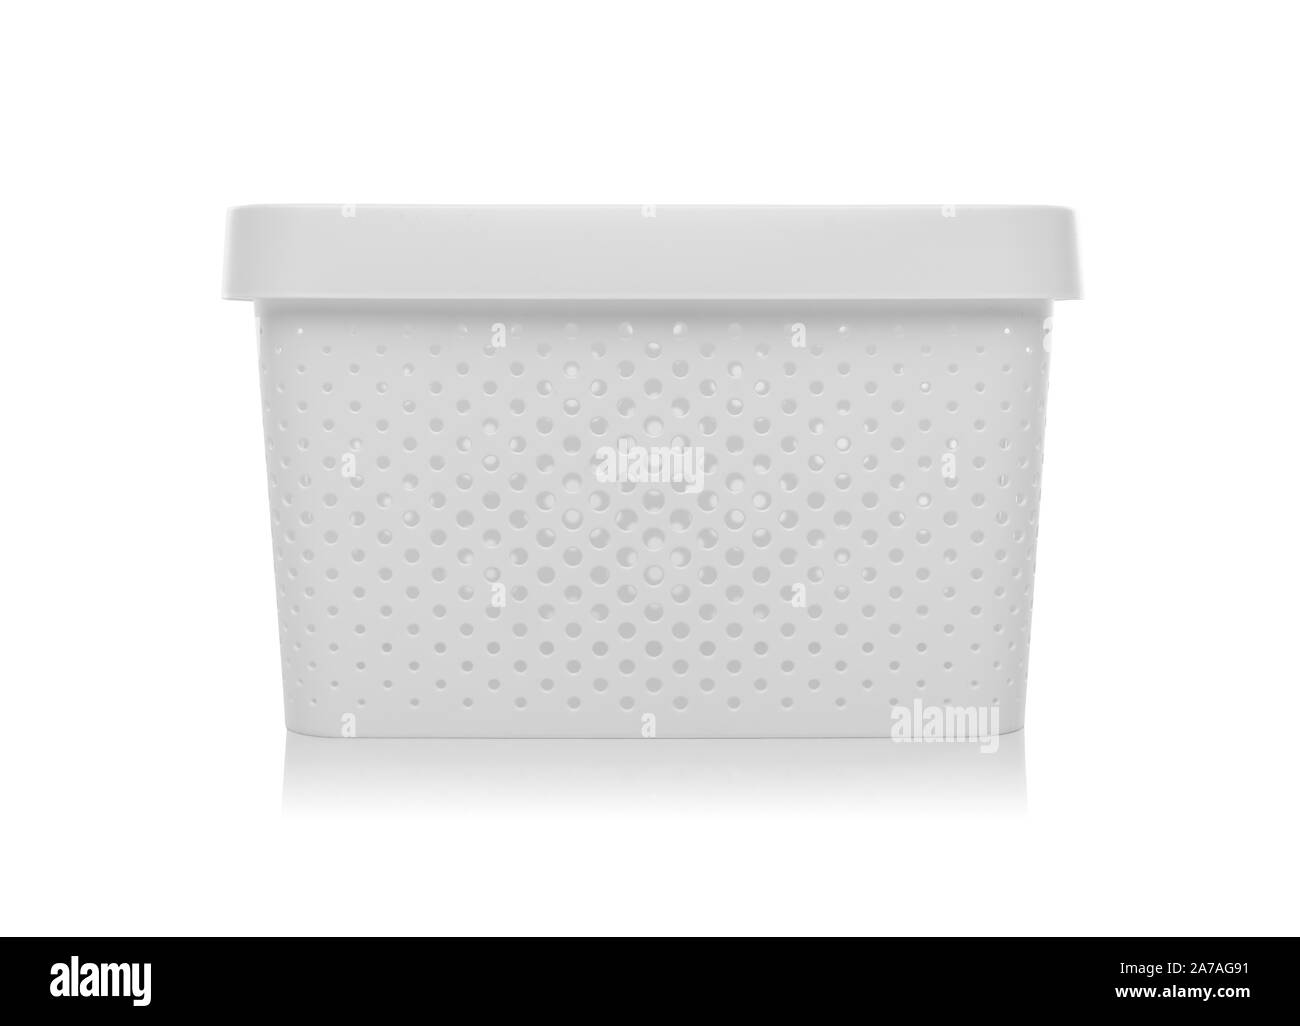 Container lid Black and White Stock Photos & Images - Alamy